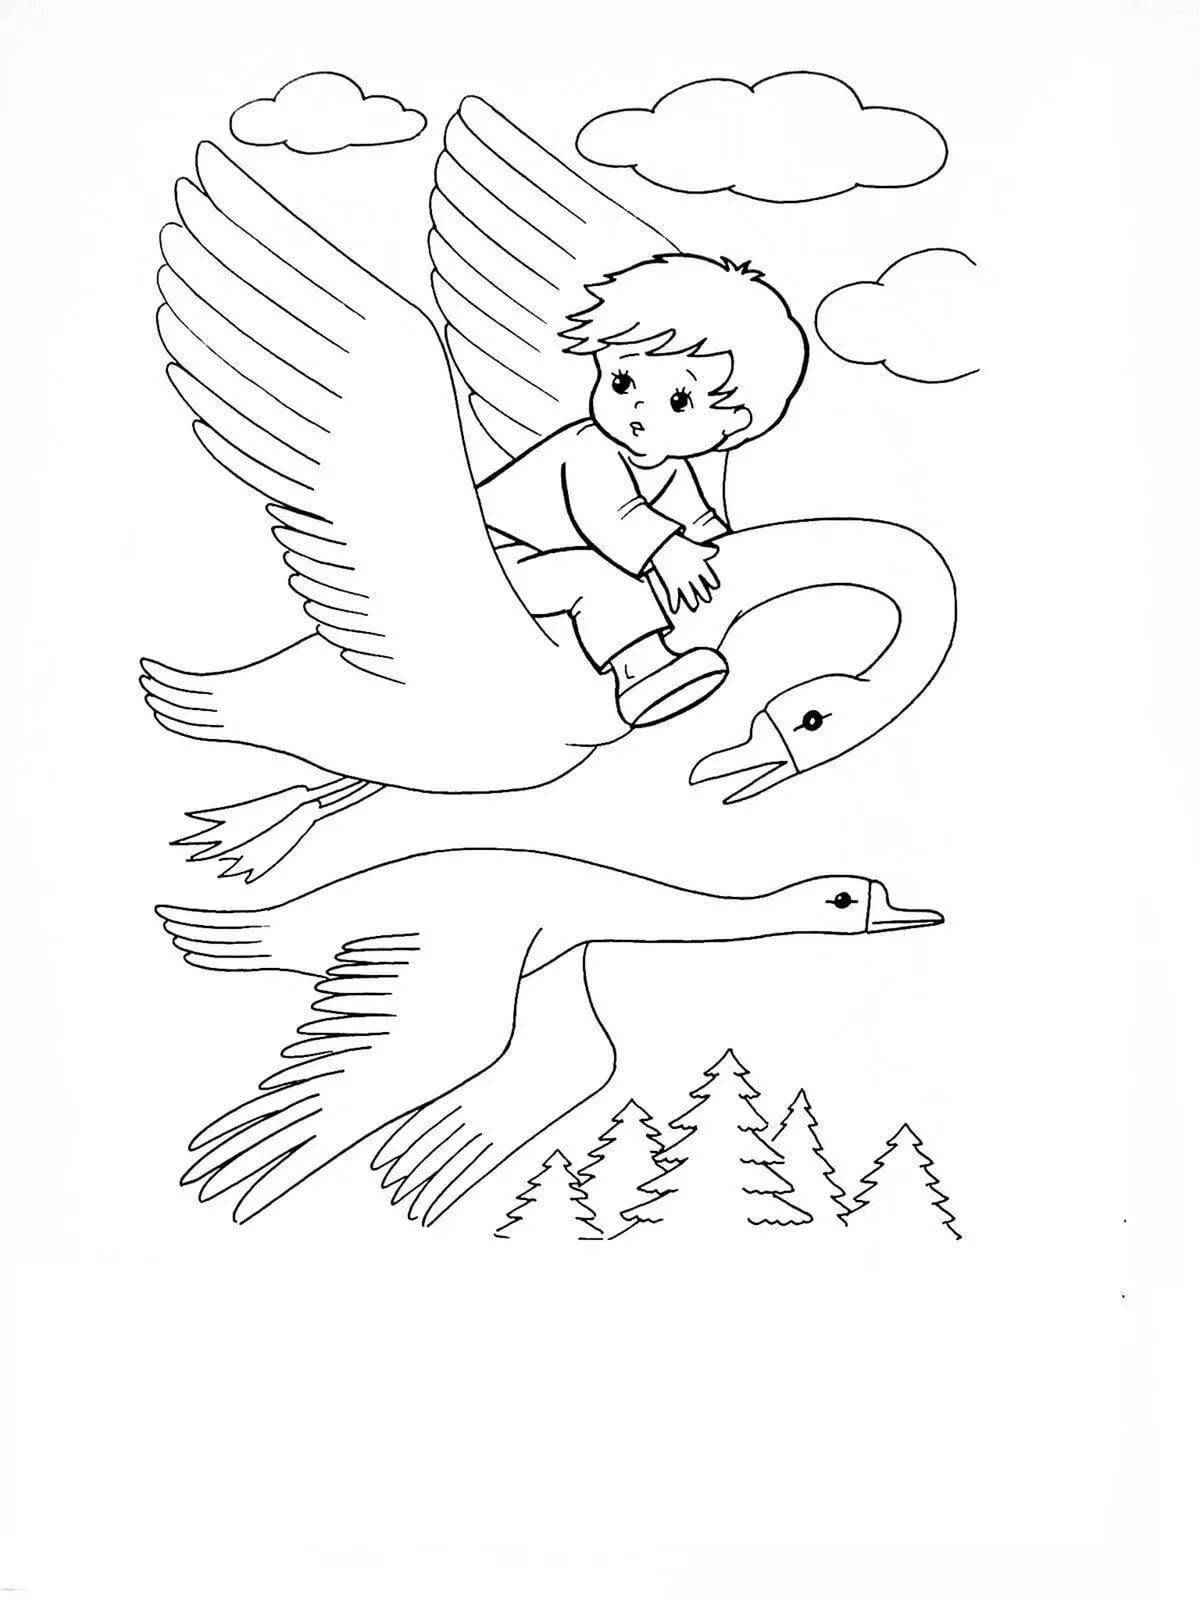 Magic swan geese coloring page